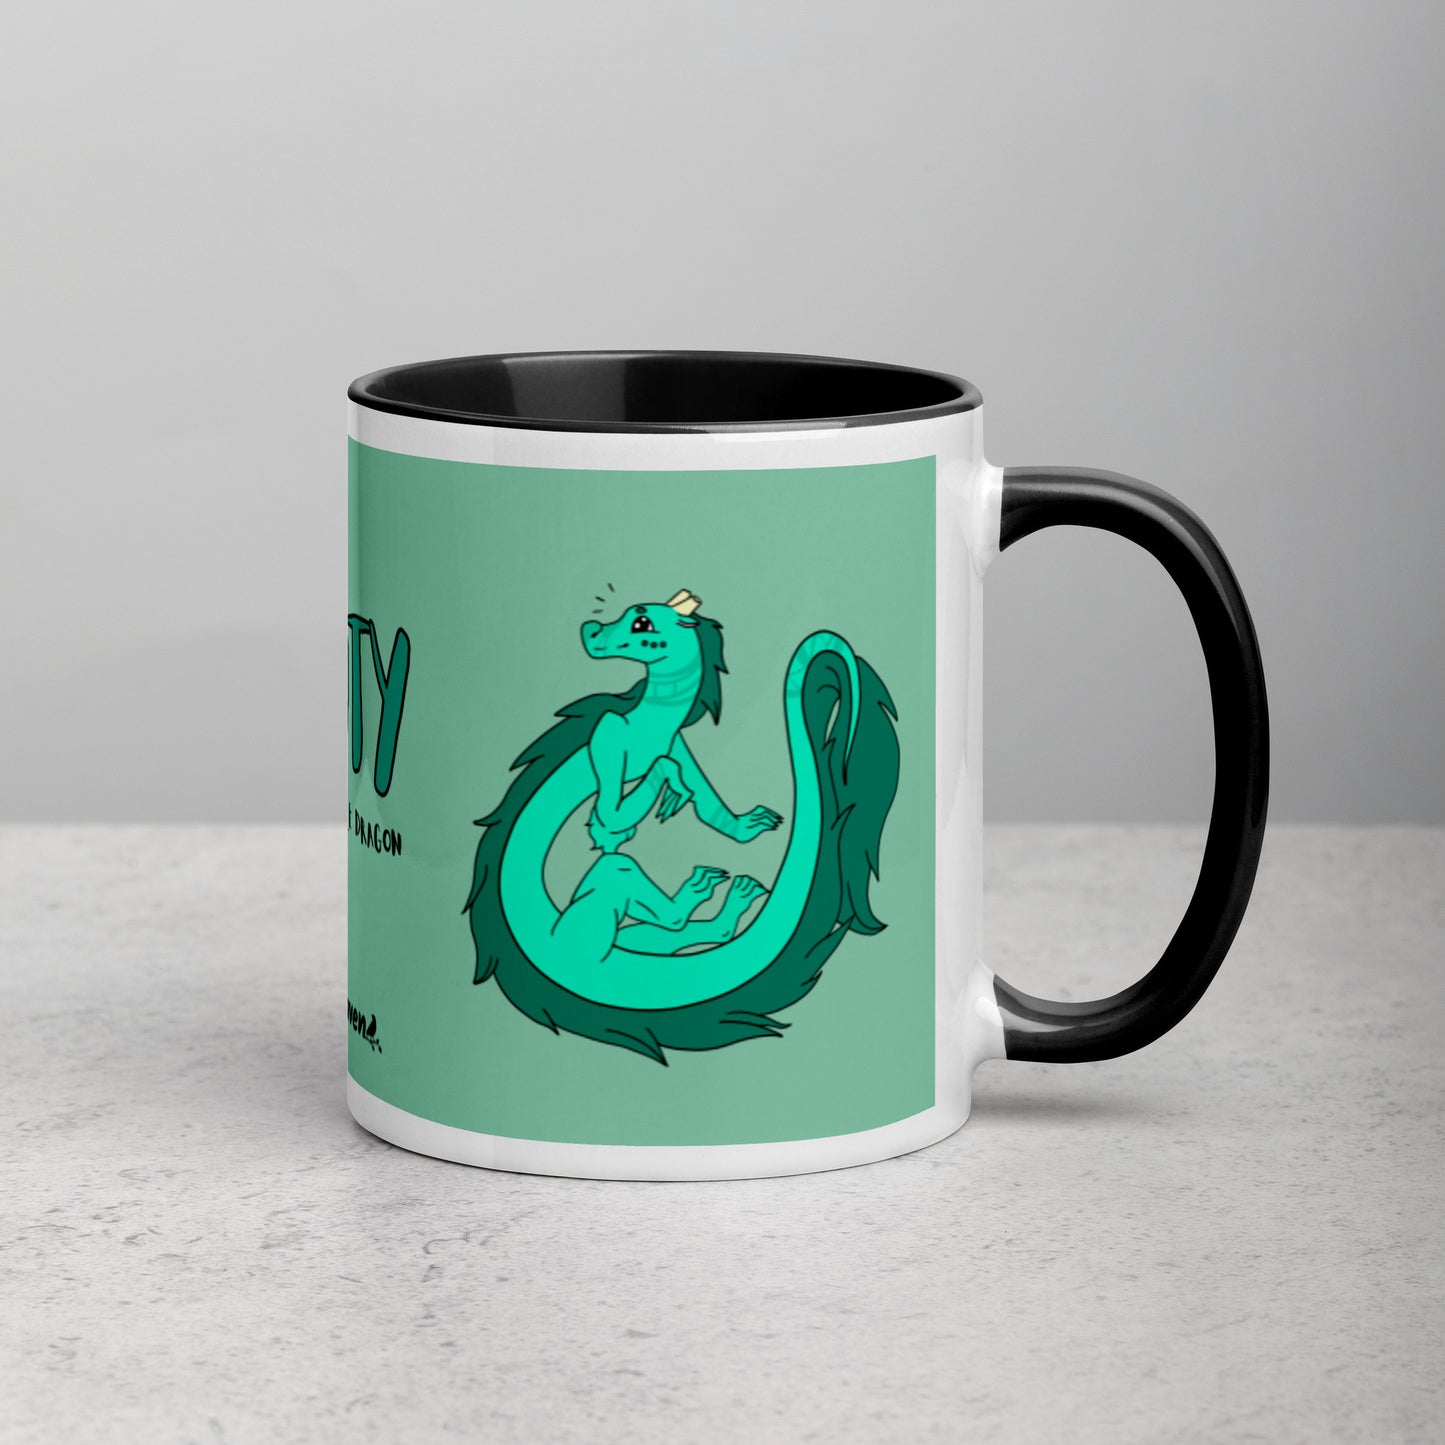 11 ounce white ceramic mug. Black inside and handle. Features double-sided image of Minty the Fuzzy Noodle Dragon on a green background. Shown on tabletop with handle facing right.